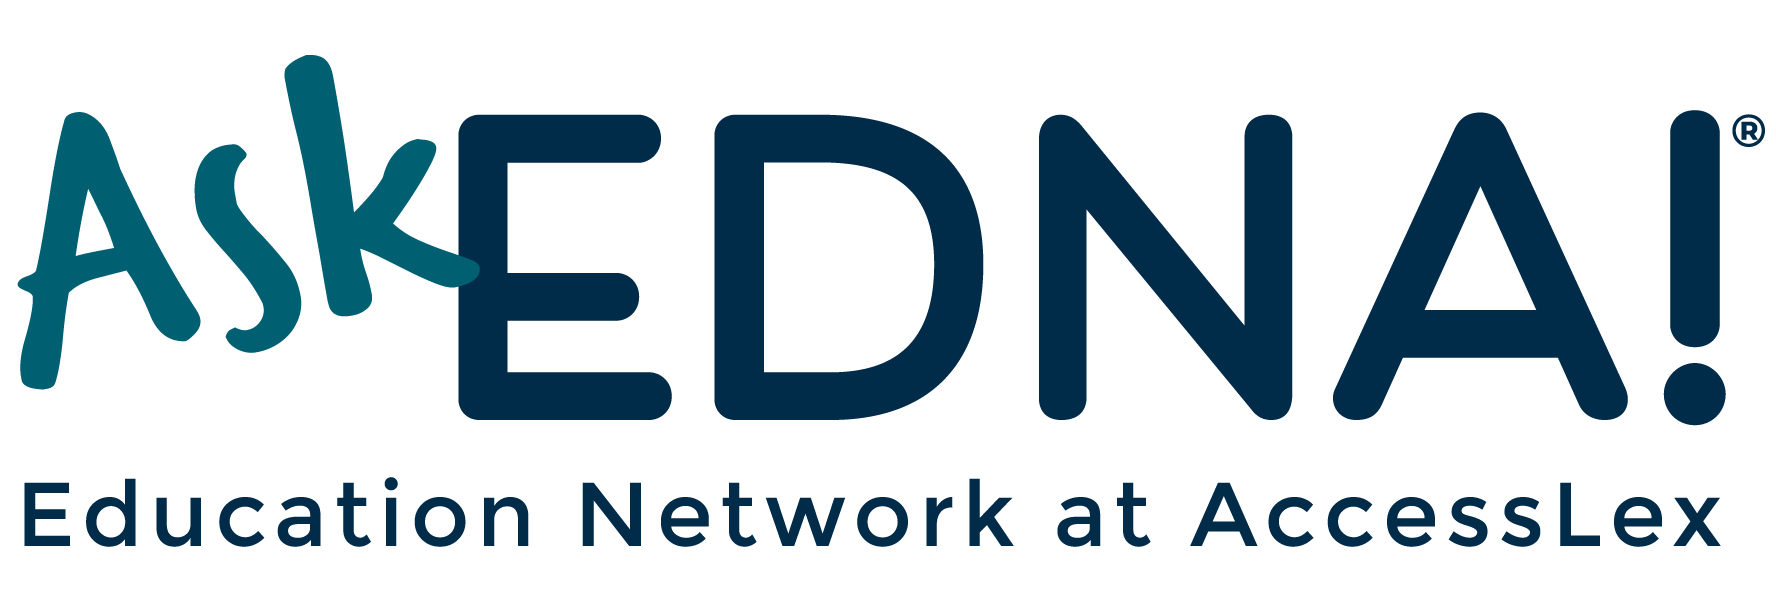 Ask EDNA! Education Network at AccessLex